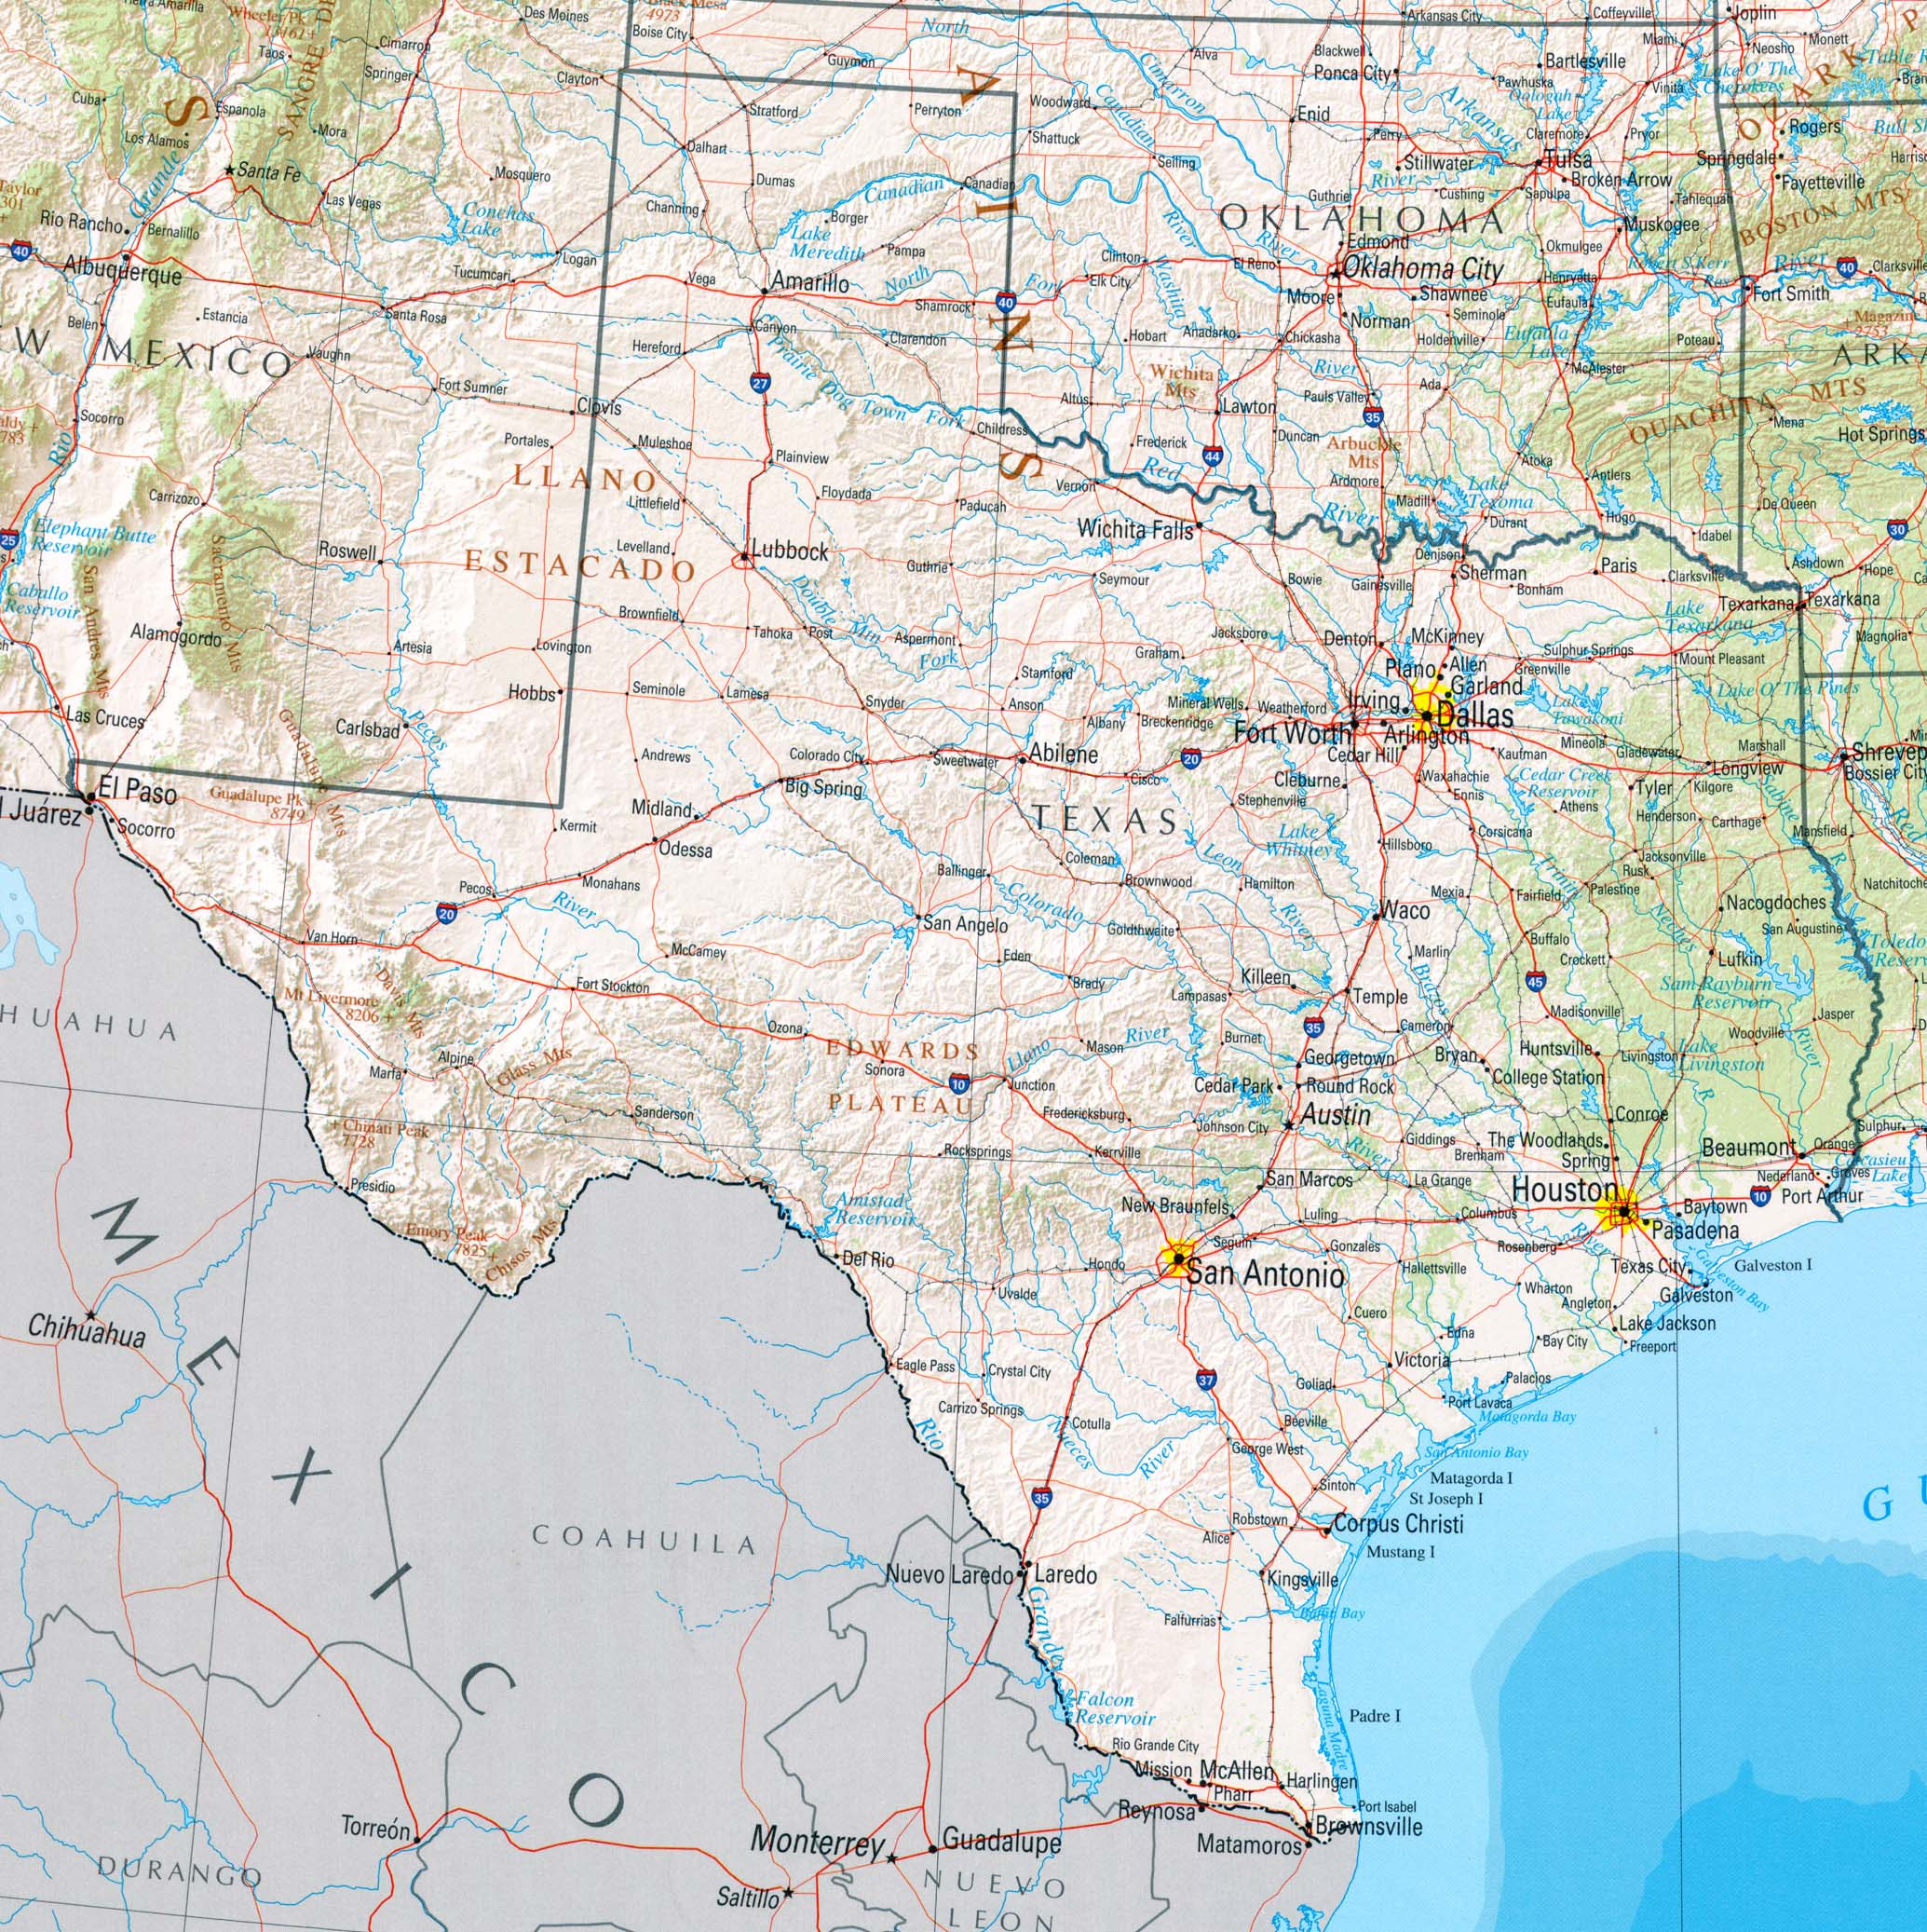 Texas Maps - Perry-Castañeda Map Collection - Ut Library Online - Texas Road Map Google